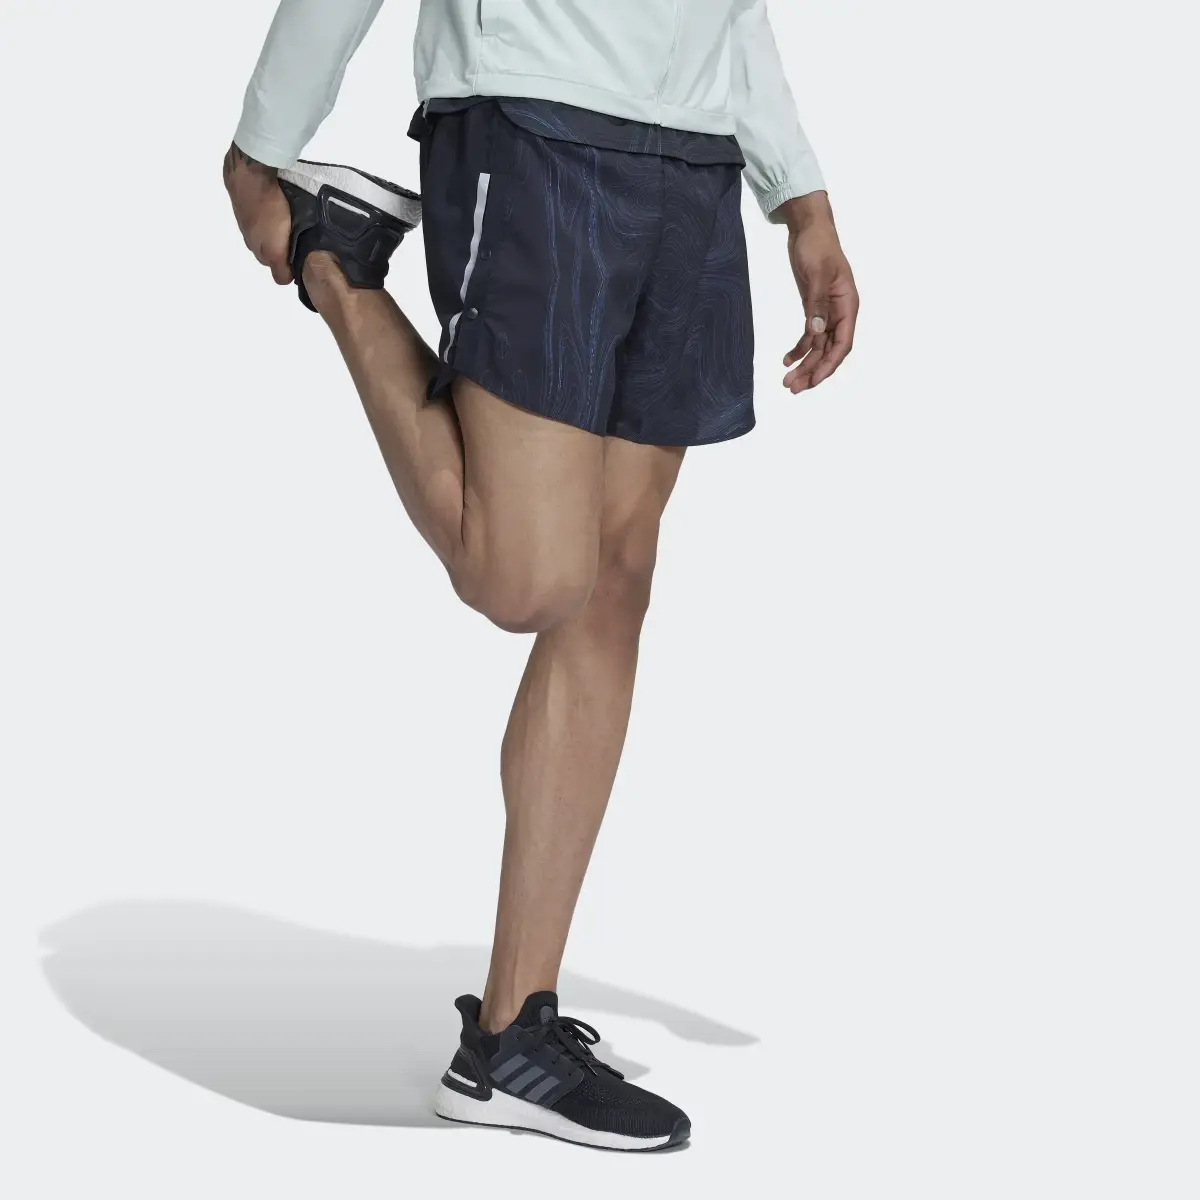 Adidas Shorts Designed for Running for the Oceans. 3